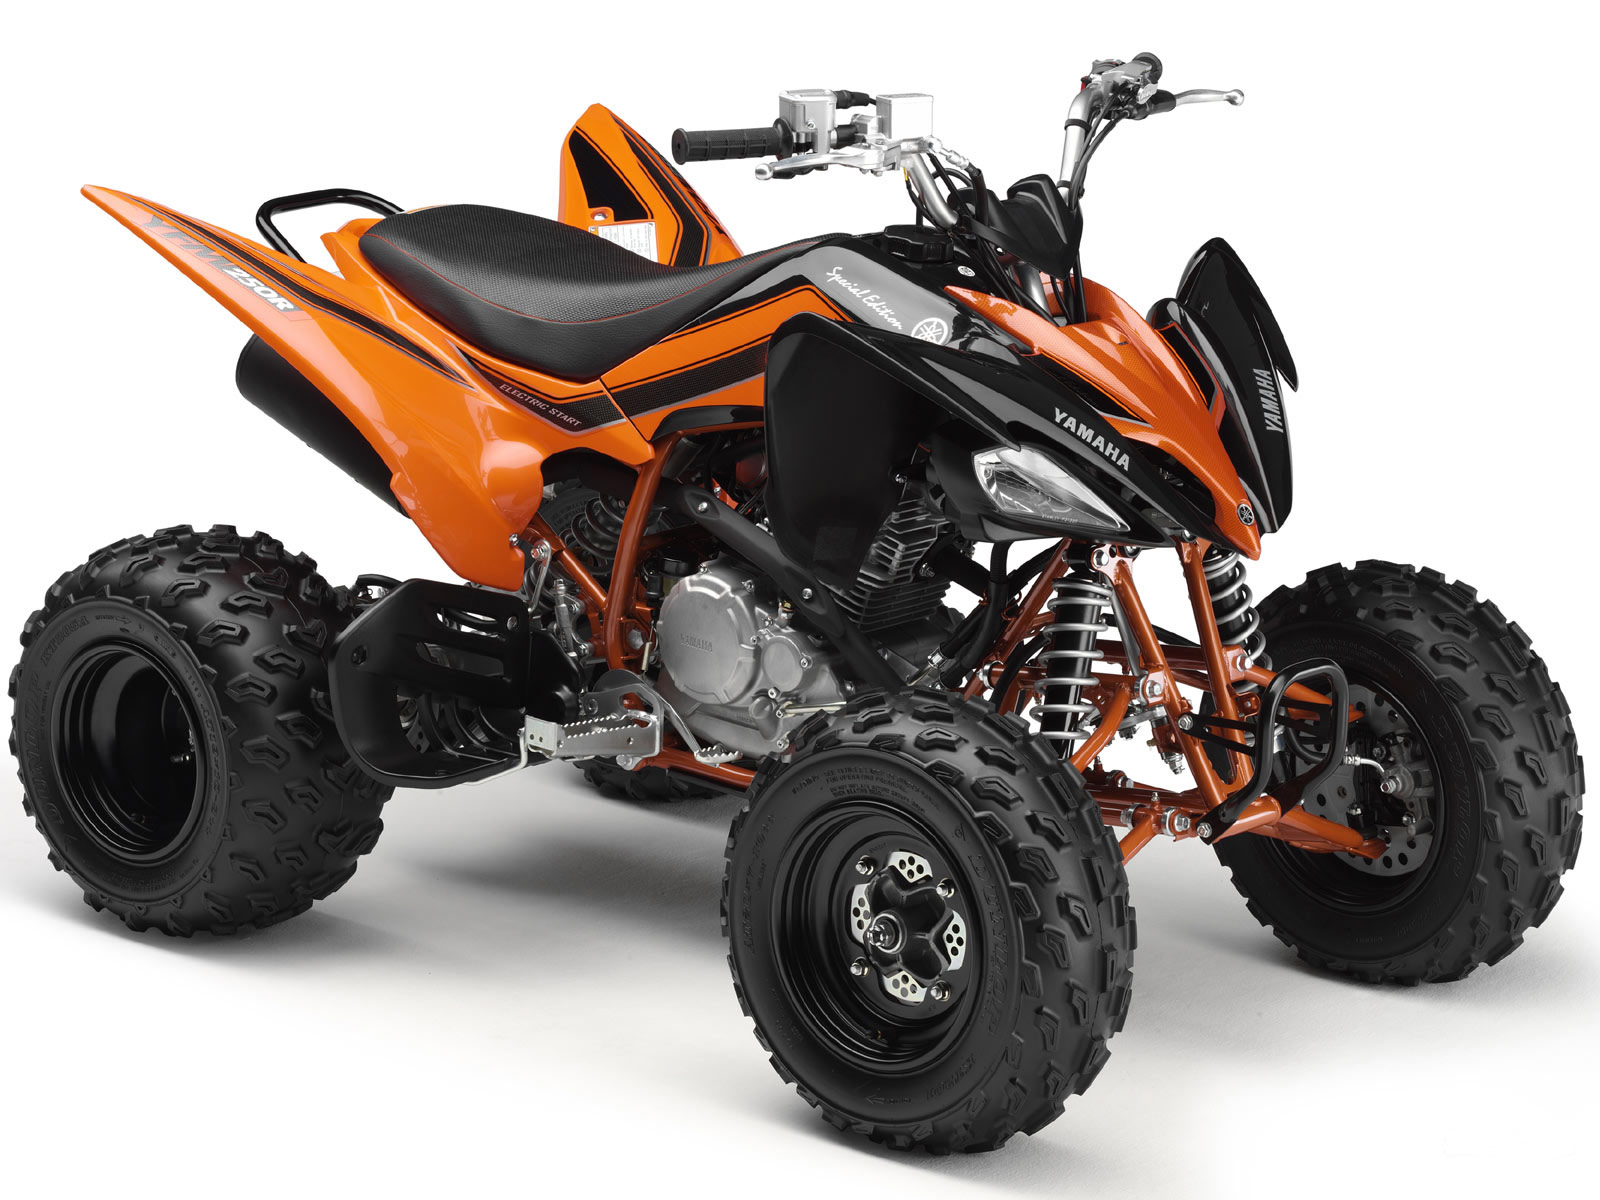 2008 YAMAHA YFM 250 Raptor ATV pictures, specifications